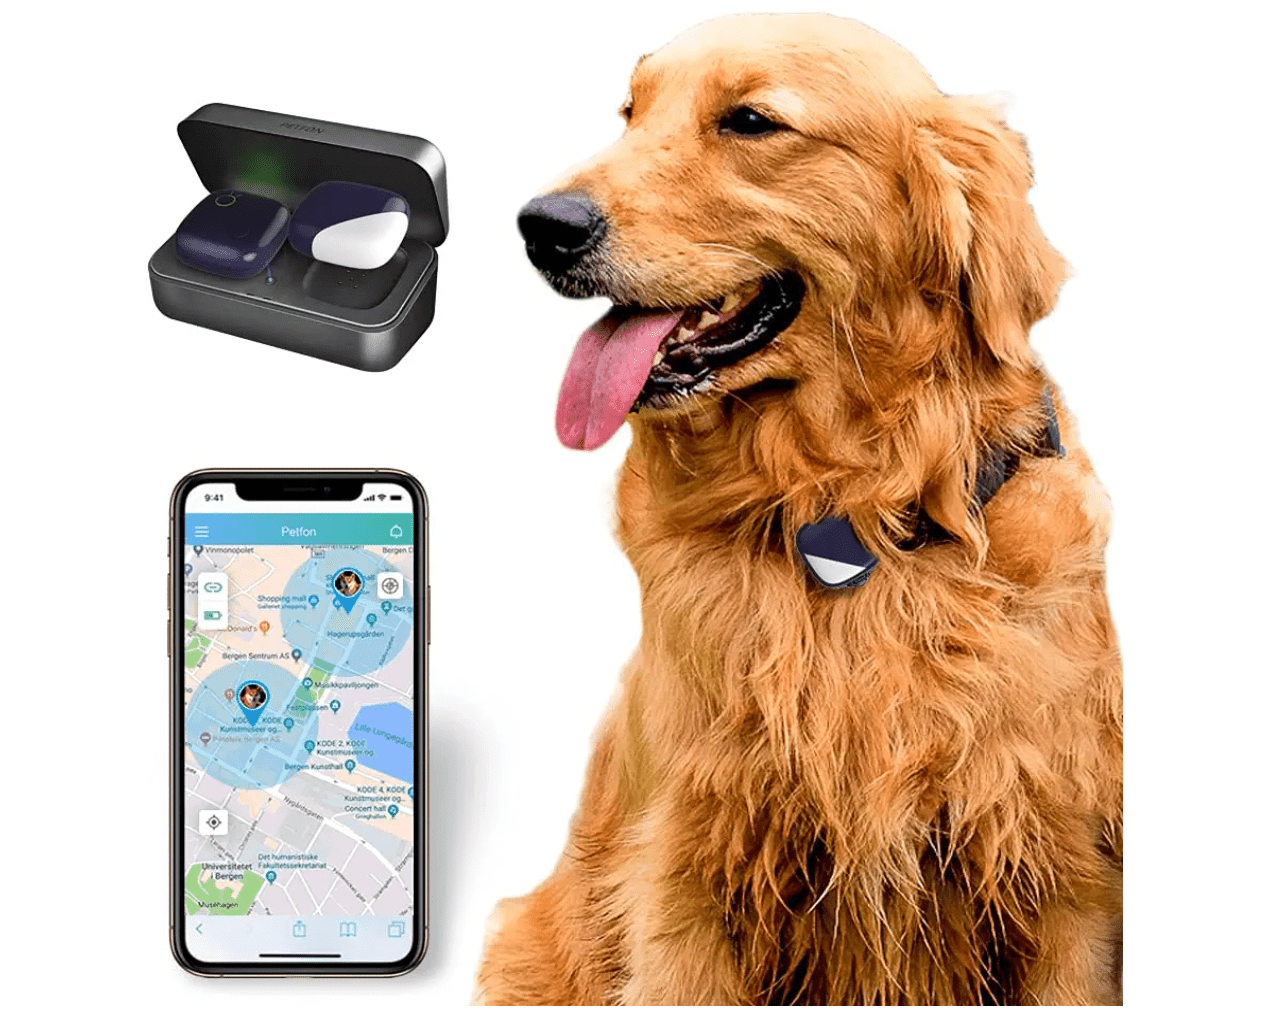 Why is it safer to setup a GPS for my dog?